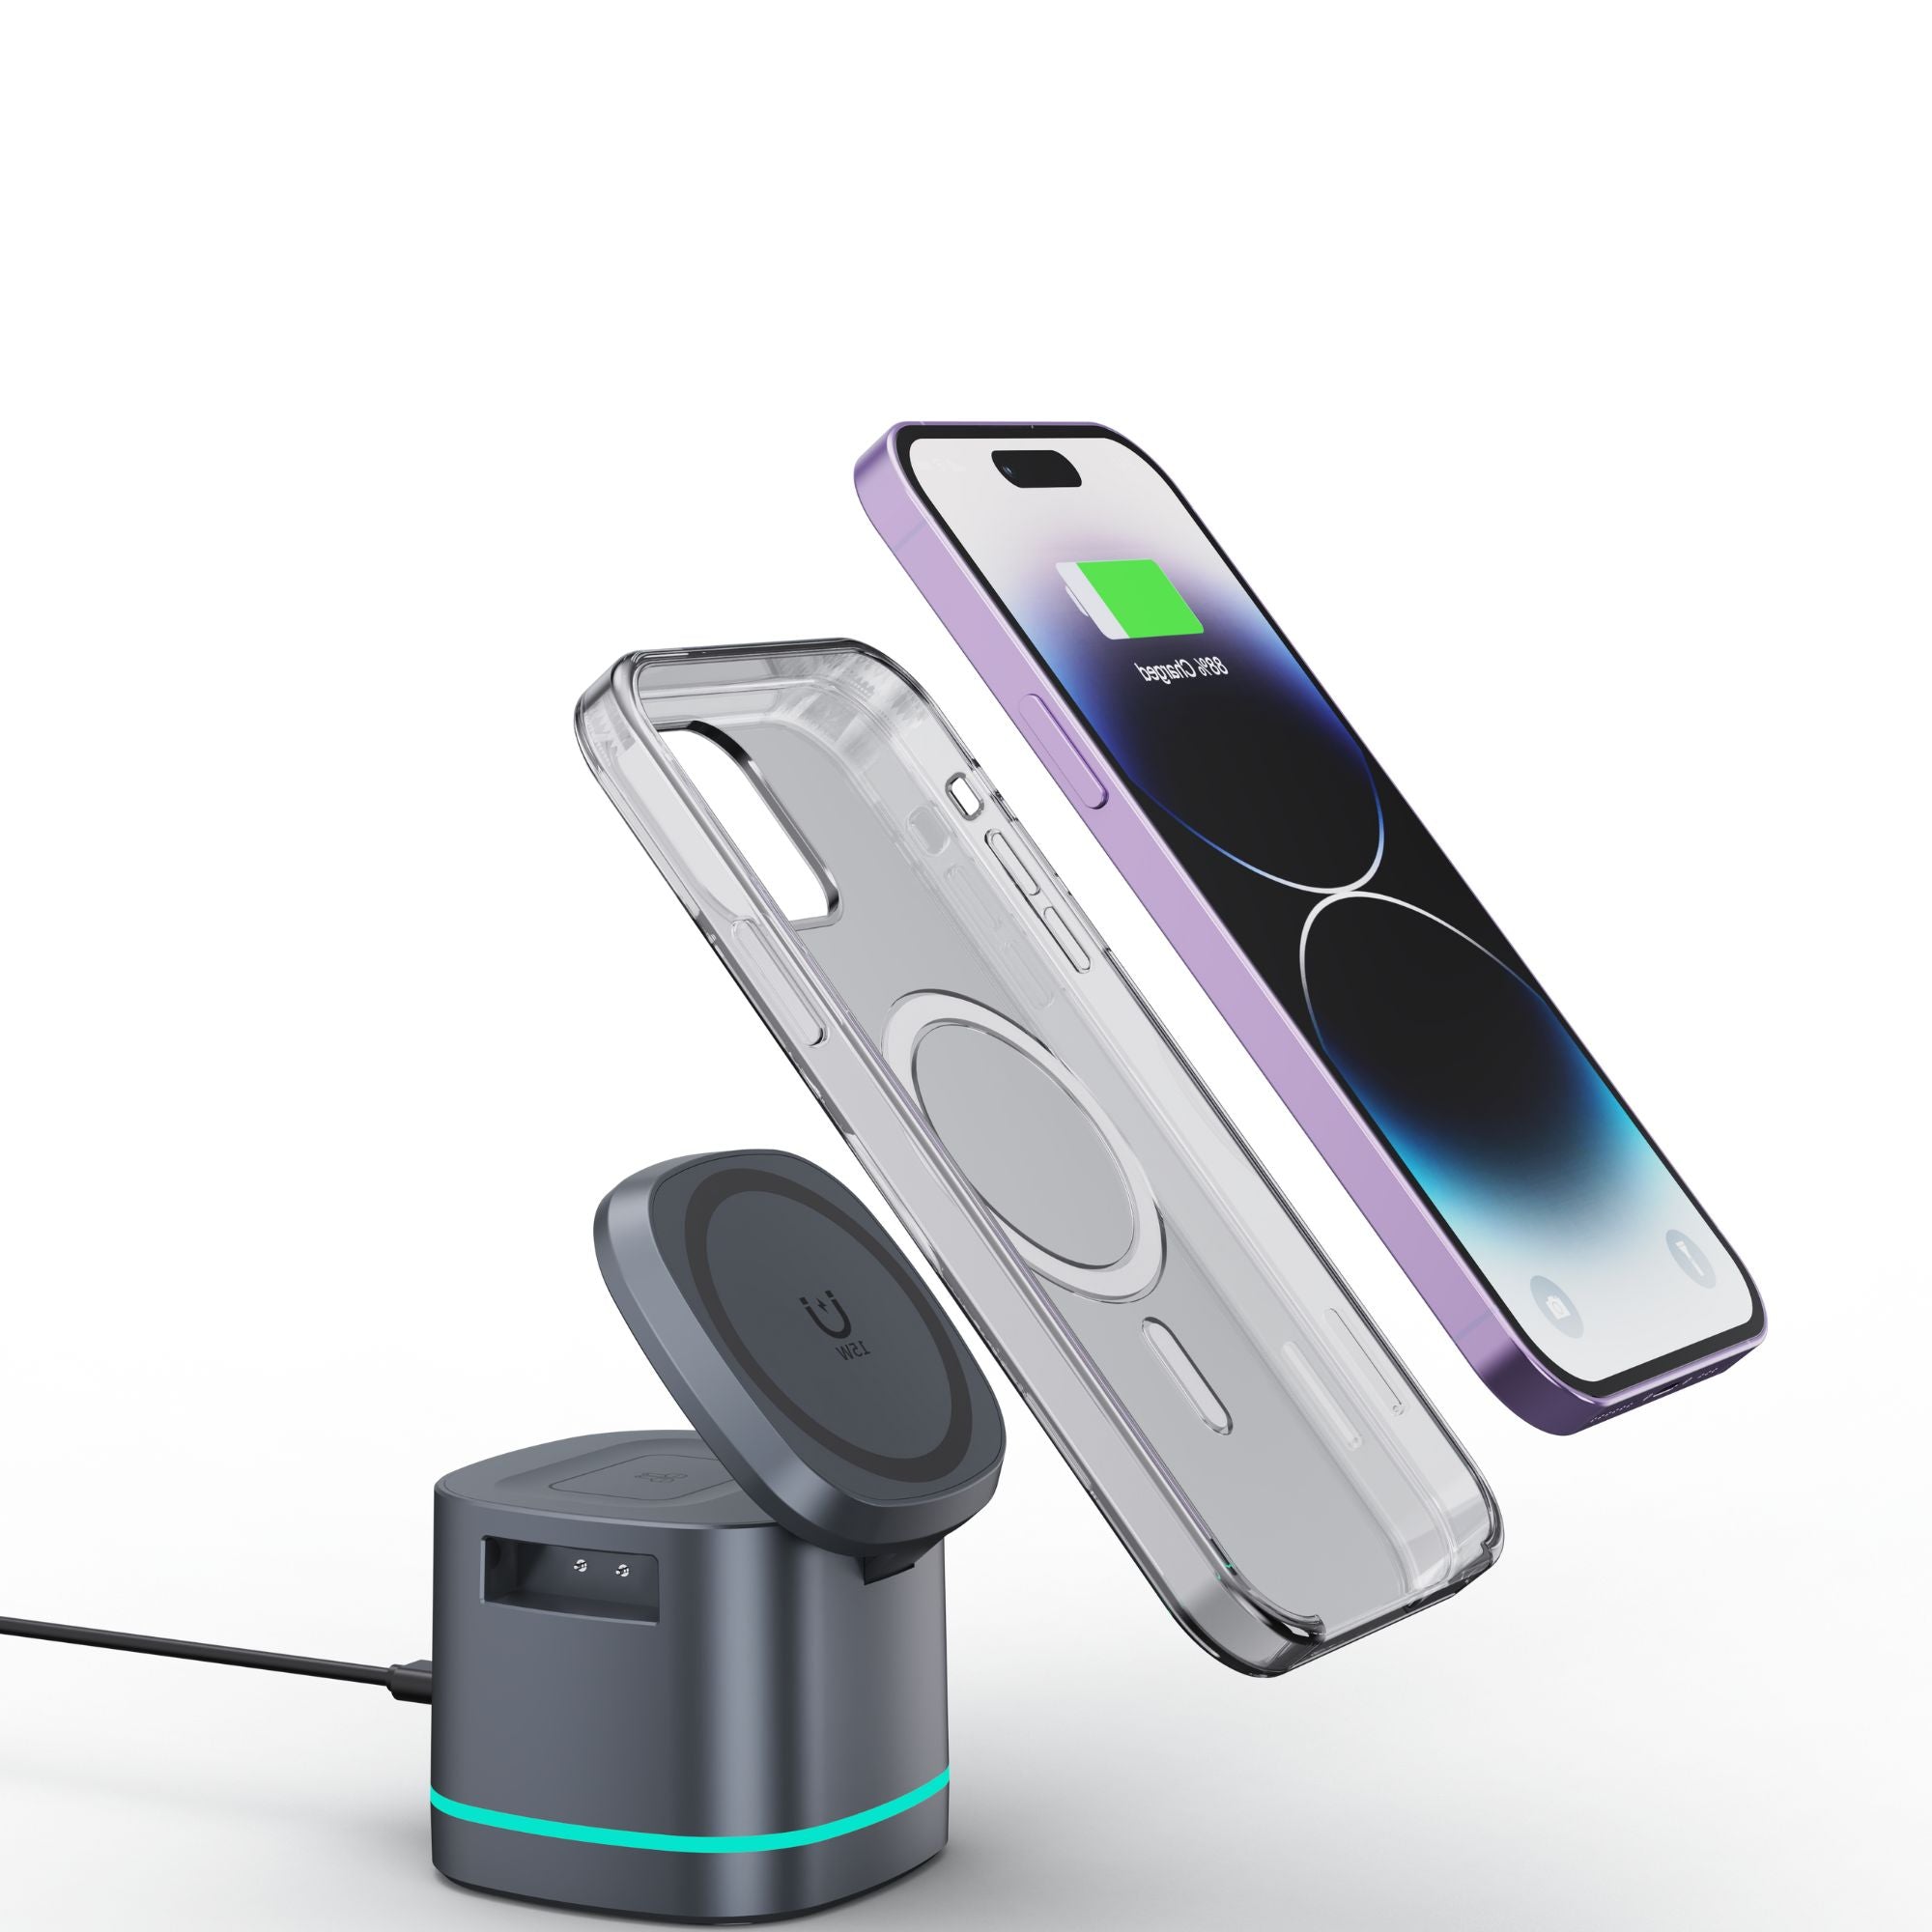 3-in-1 Smart Charging Station for Apple Devices